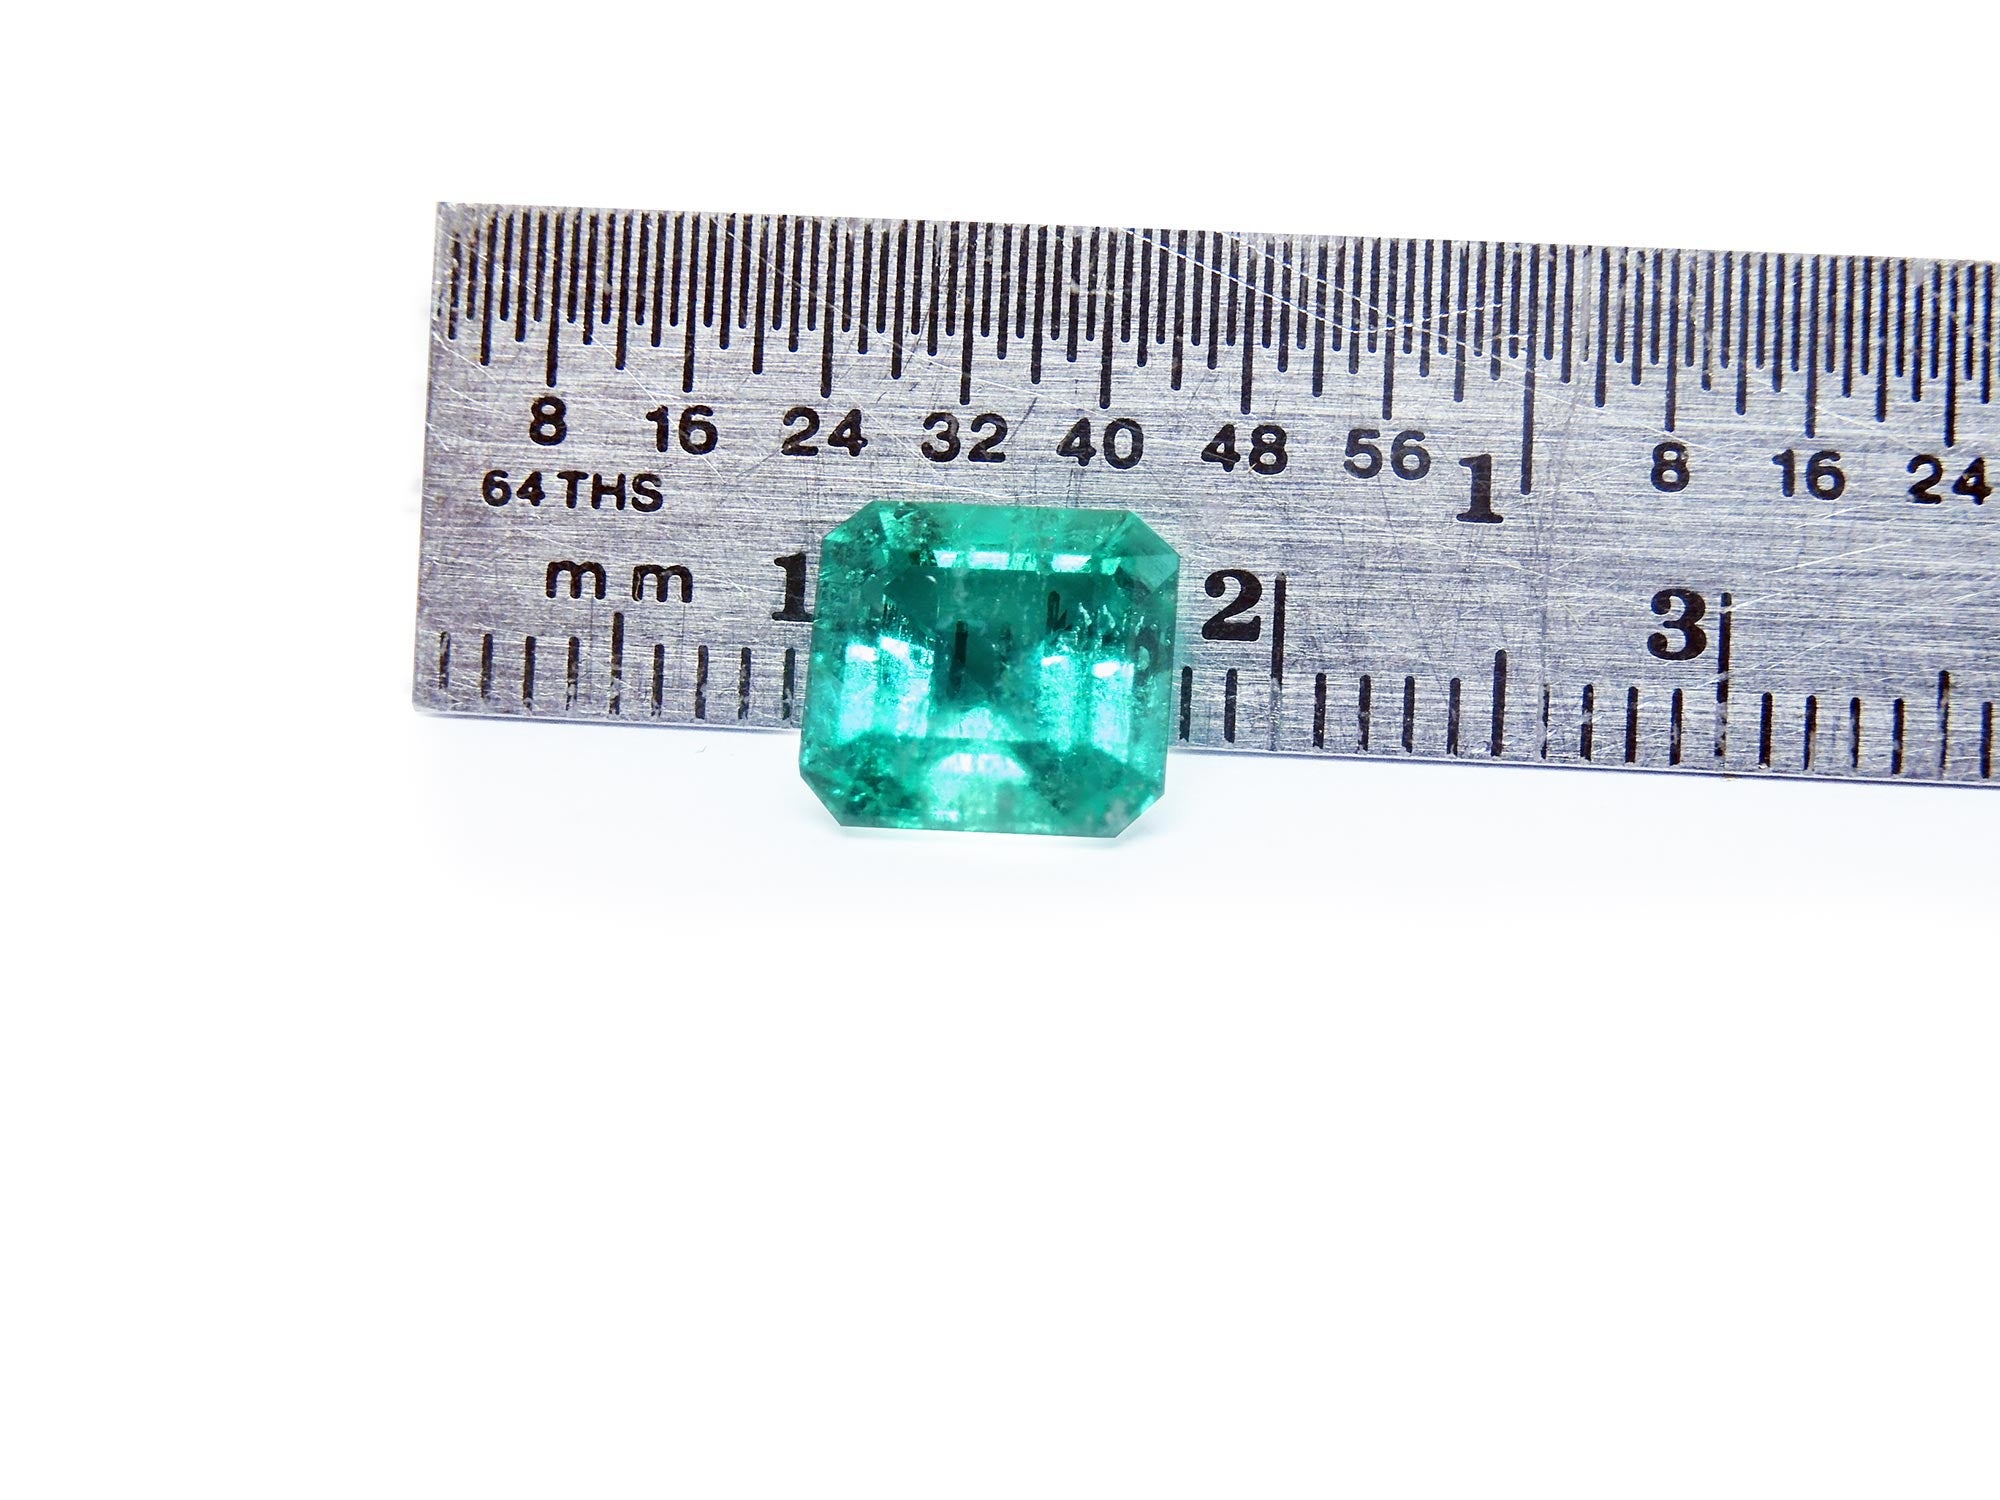 Natural Colombian emerald